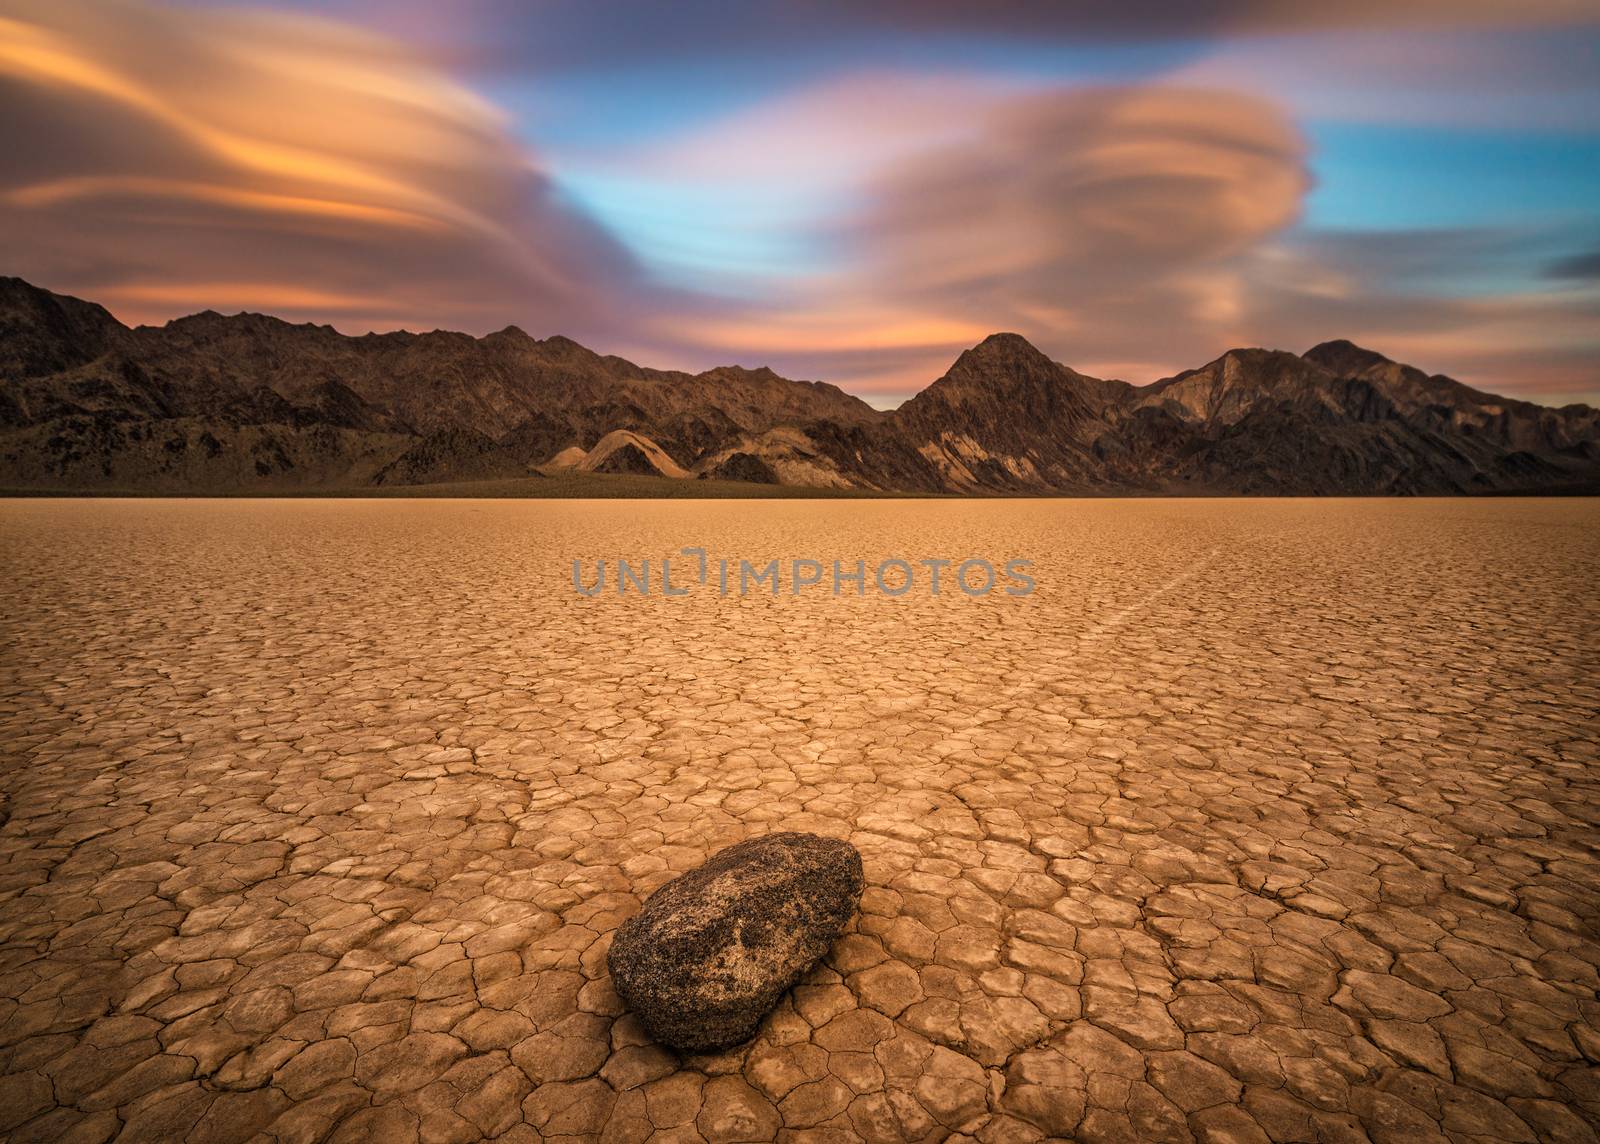  Sailing stone on the The Racetrack Playa in Death Valley National Park at sunset. The Racetrack Playa is a scenic dry lake with moving stones that inscribe linear imprints. Long exposure.